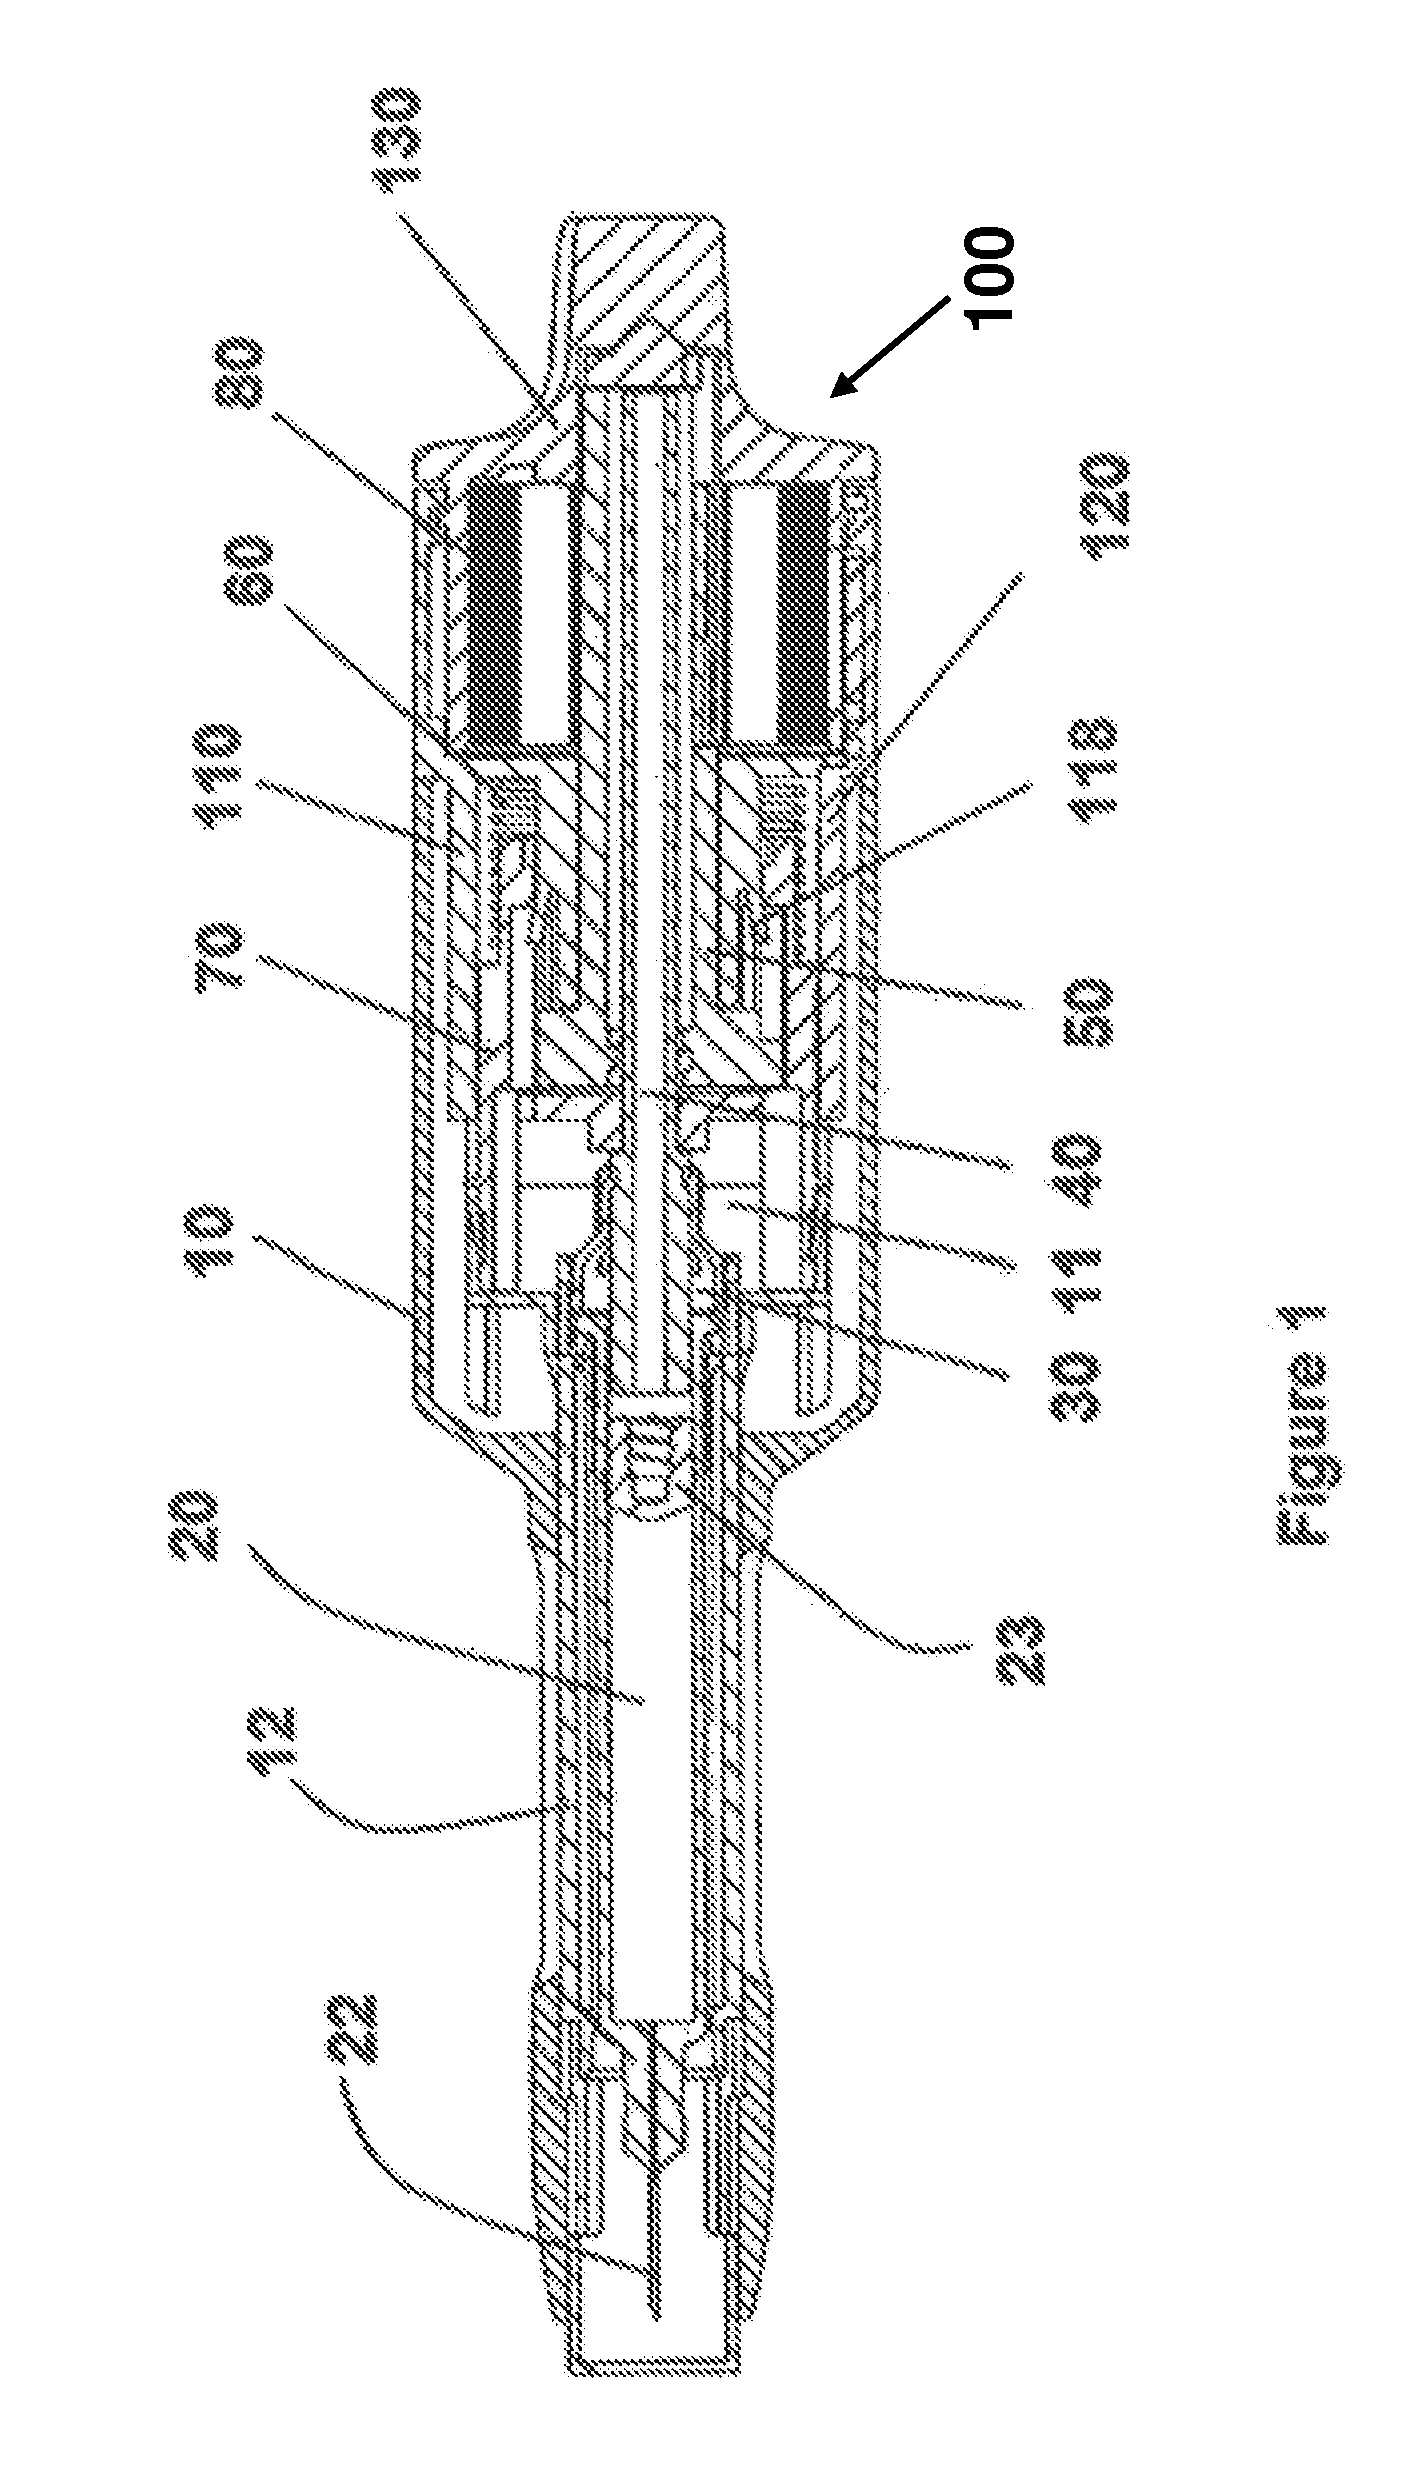 Automatic injection device with needle insertion